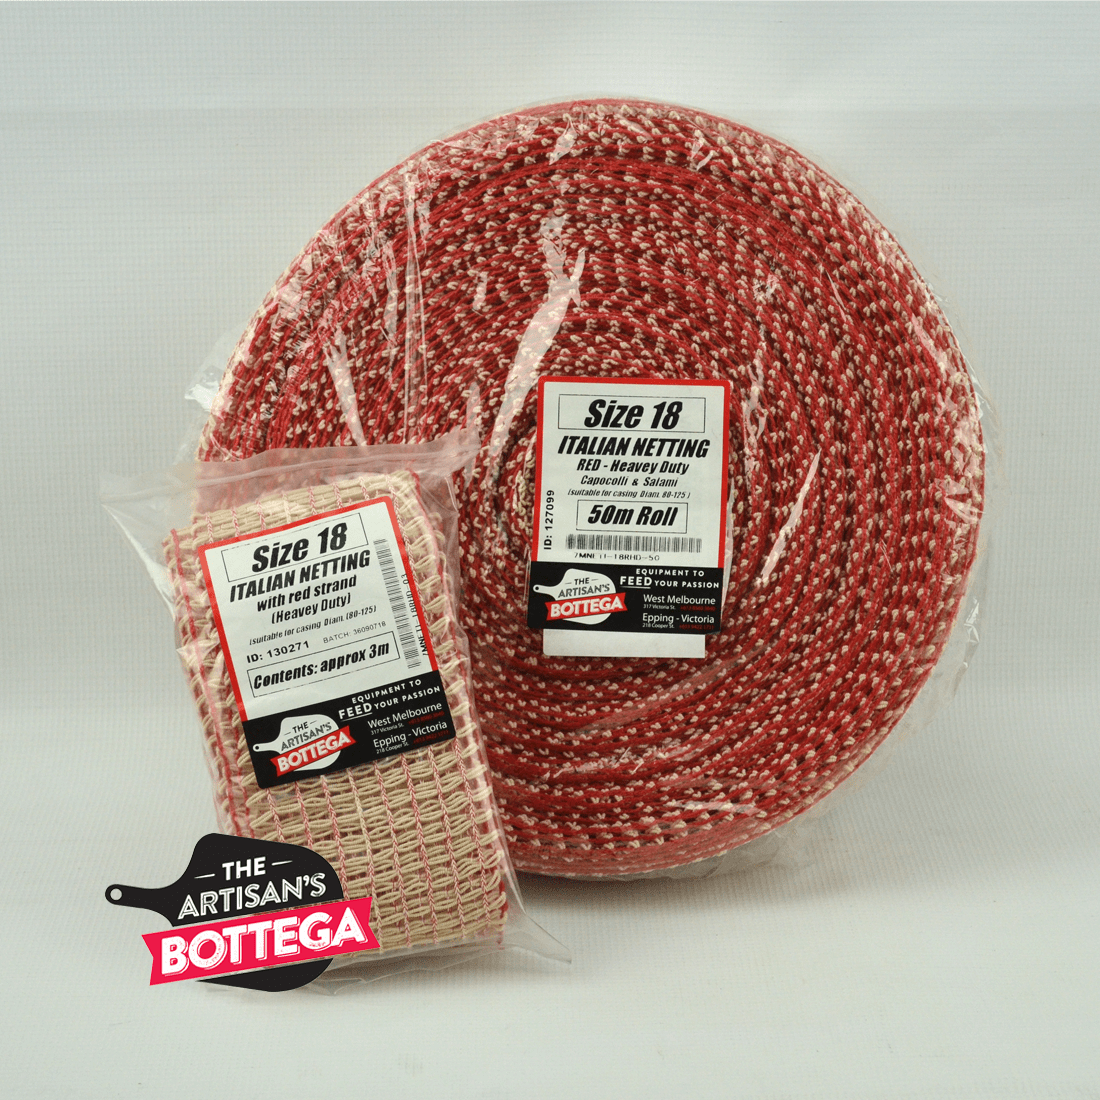 products-heavy_netting_group_artisan_s_bottega.png